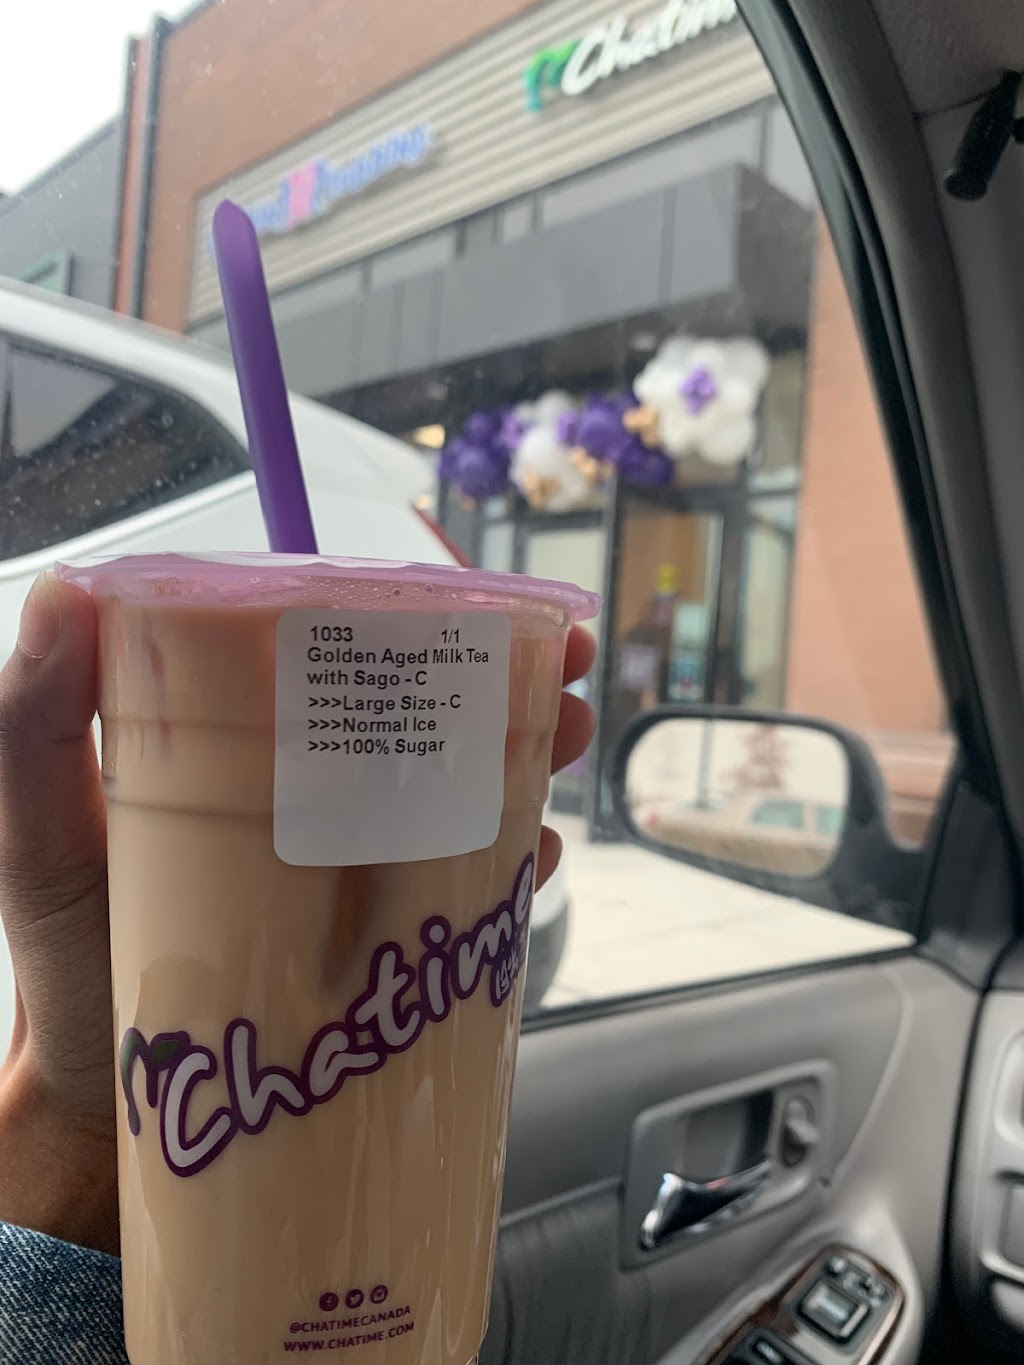 Chatime | cafe | 2610 Simcoe St N, Oshawa, ON L1H 7K4, Canada | 9059633335 OR +1 905-963-3335